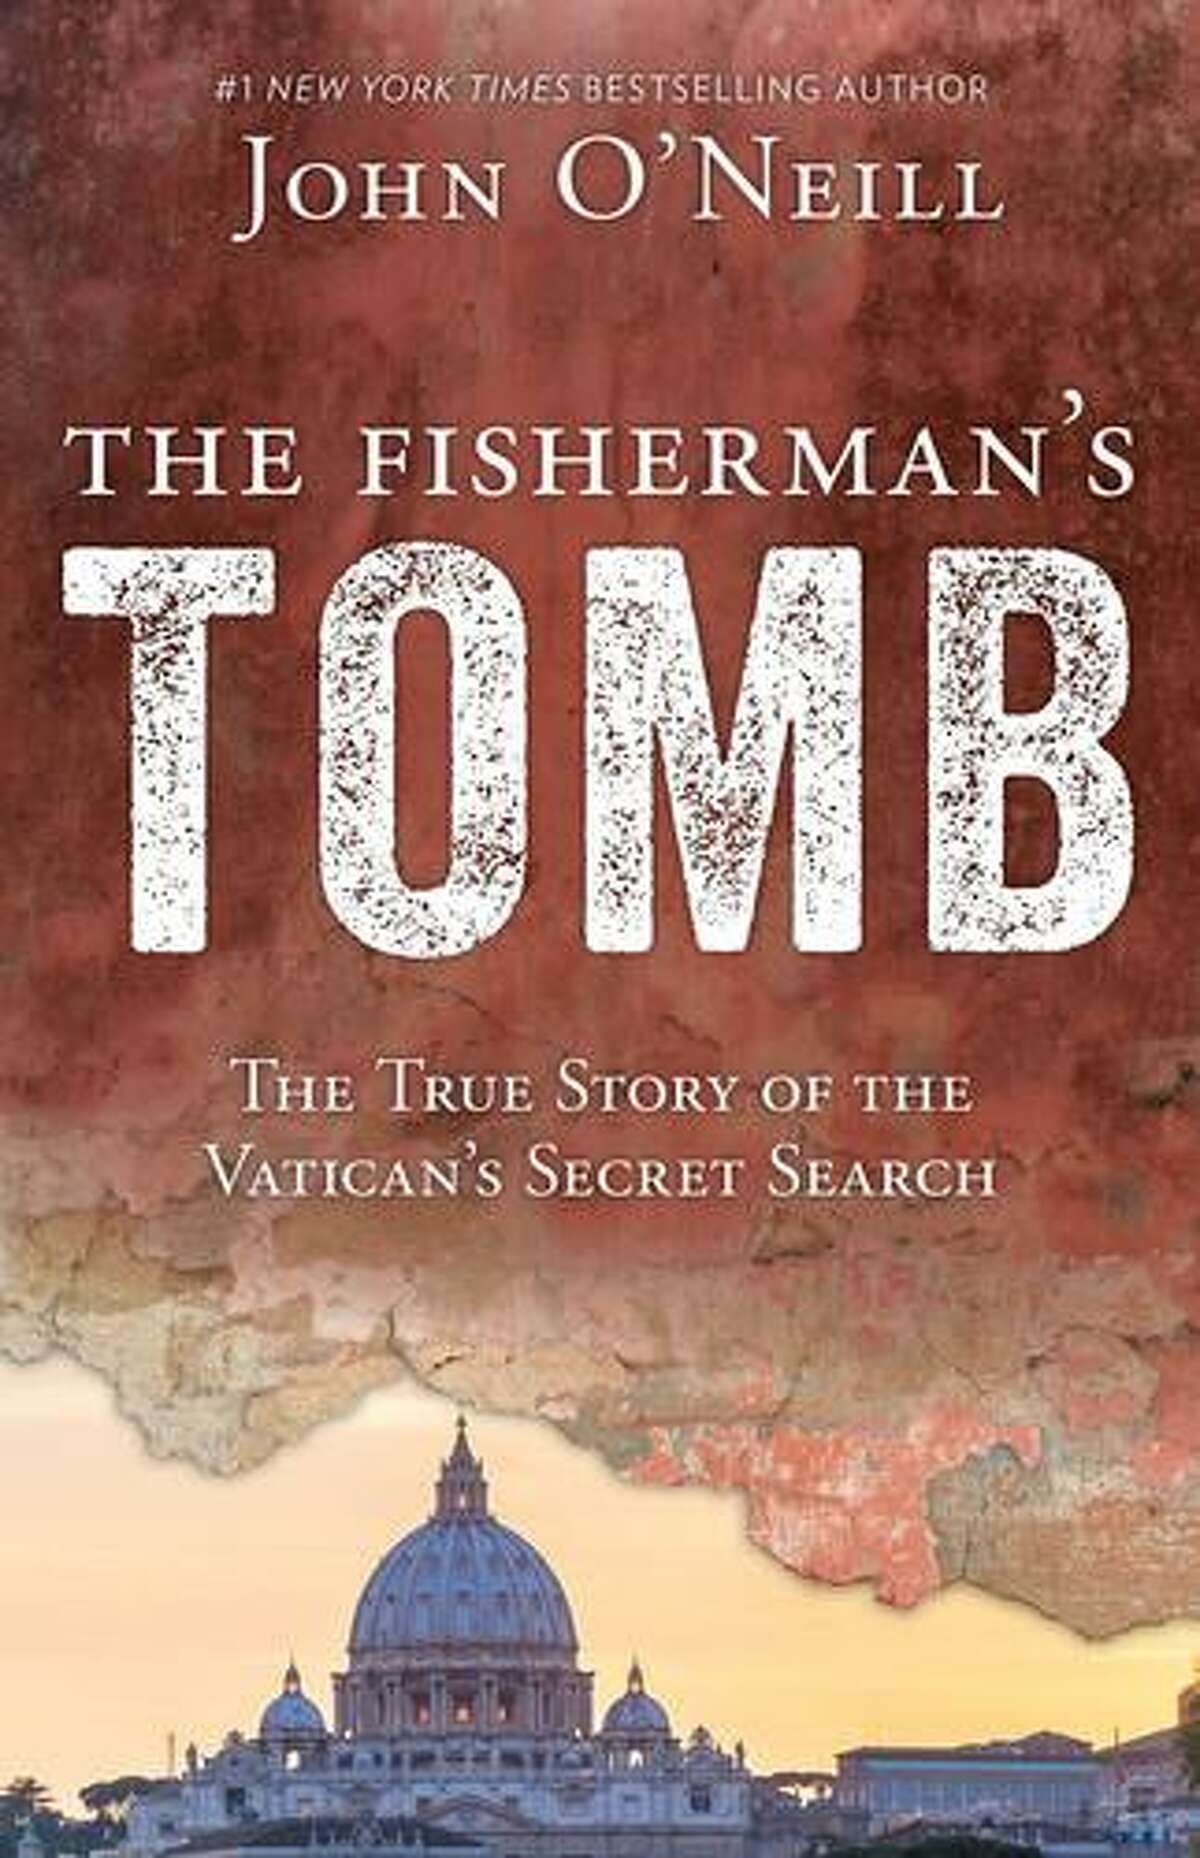 John O'Neill's book "The Fisherman's Tomb: The True Story of the Vatican's Secret Search.”